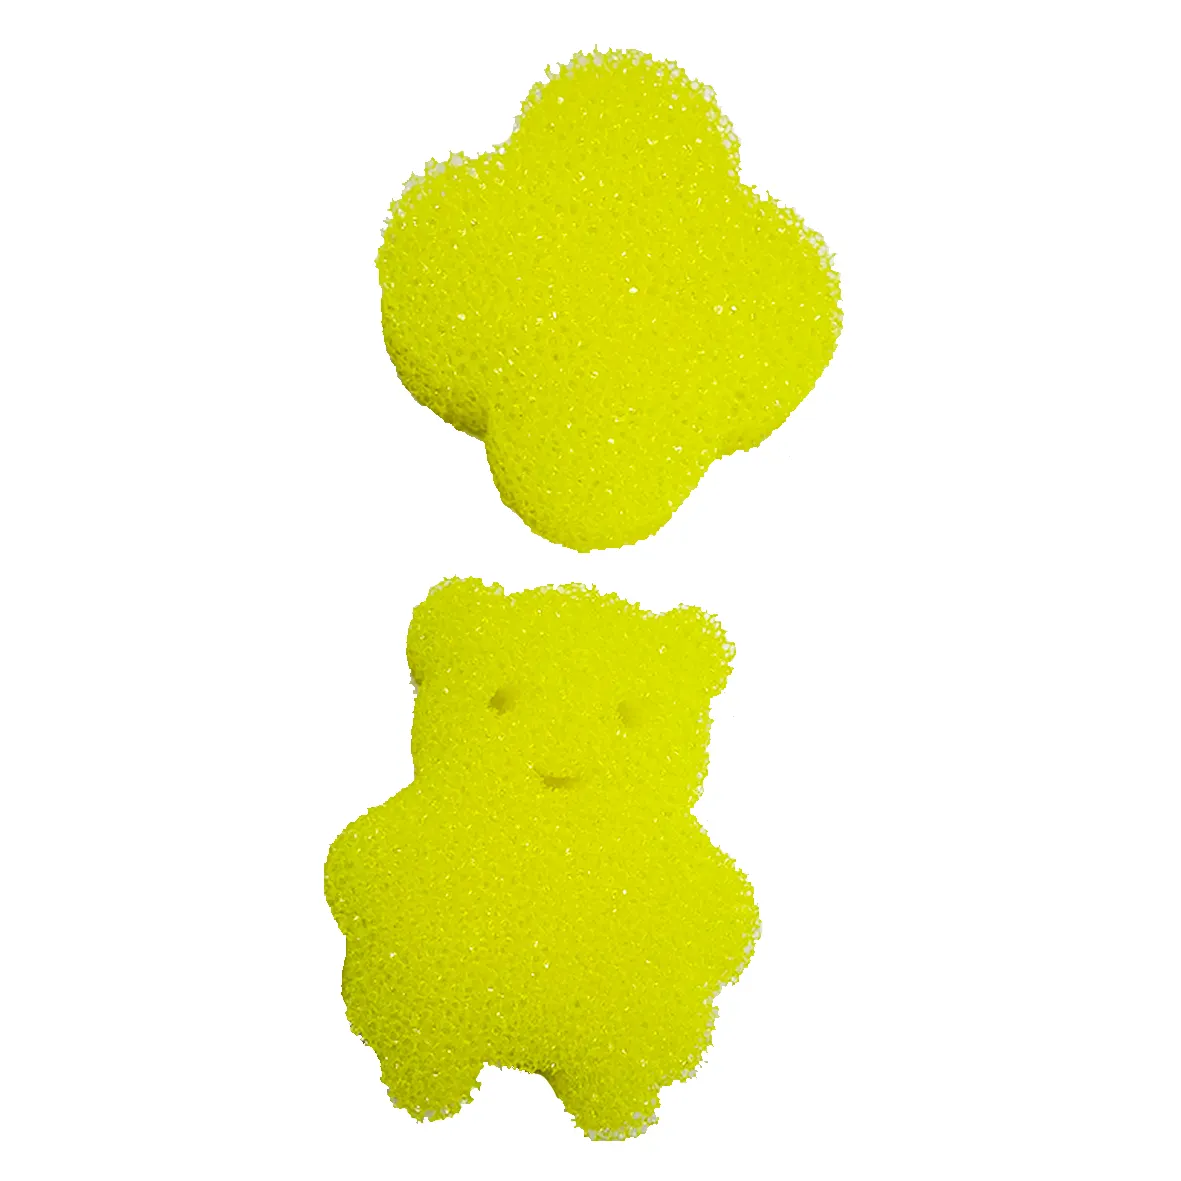 Double-sided Oil-absorbent Dish Sponge Cleaning Of Pool Oil Durable Cleaning Sponge Cartoon Image Sponge Wipe For Holiday